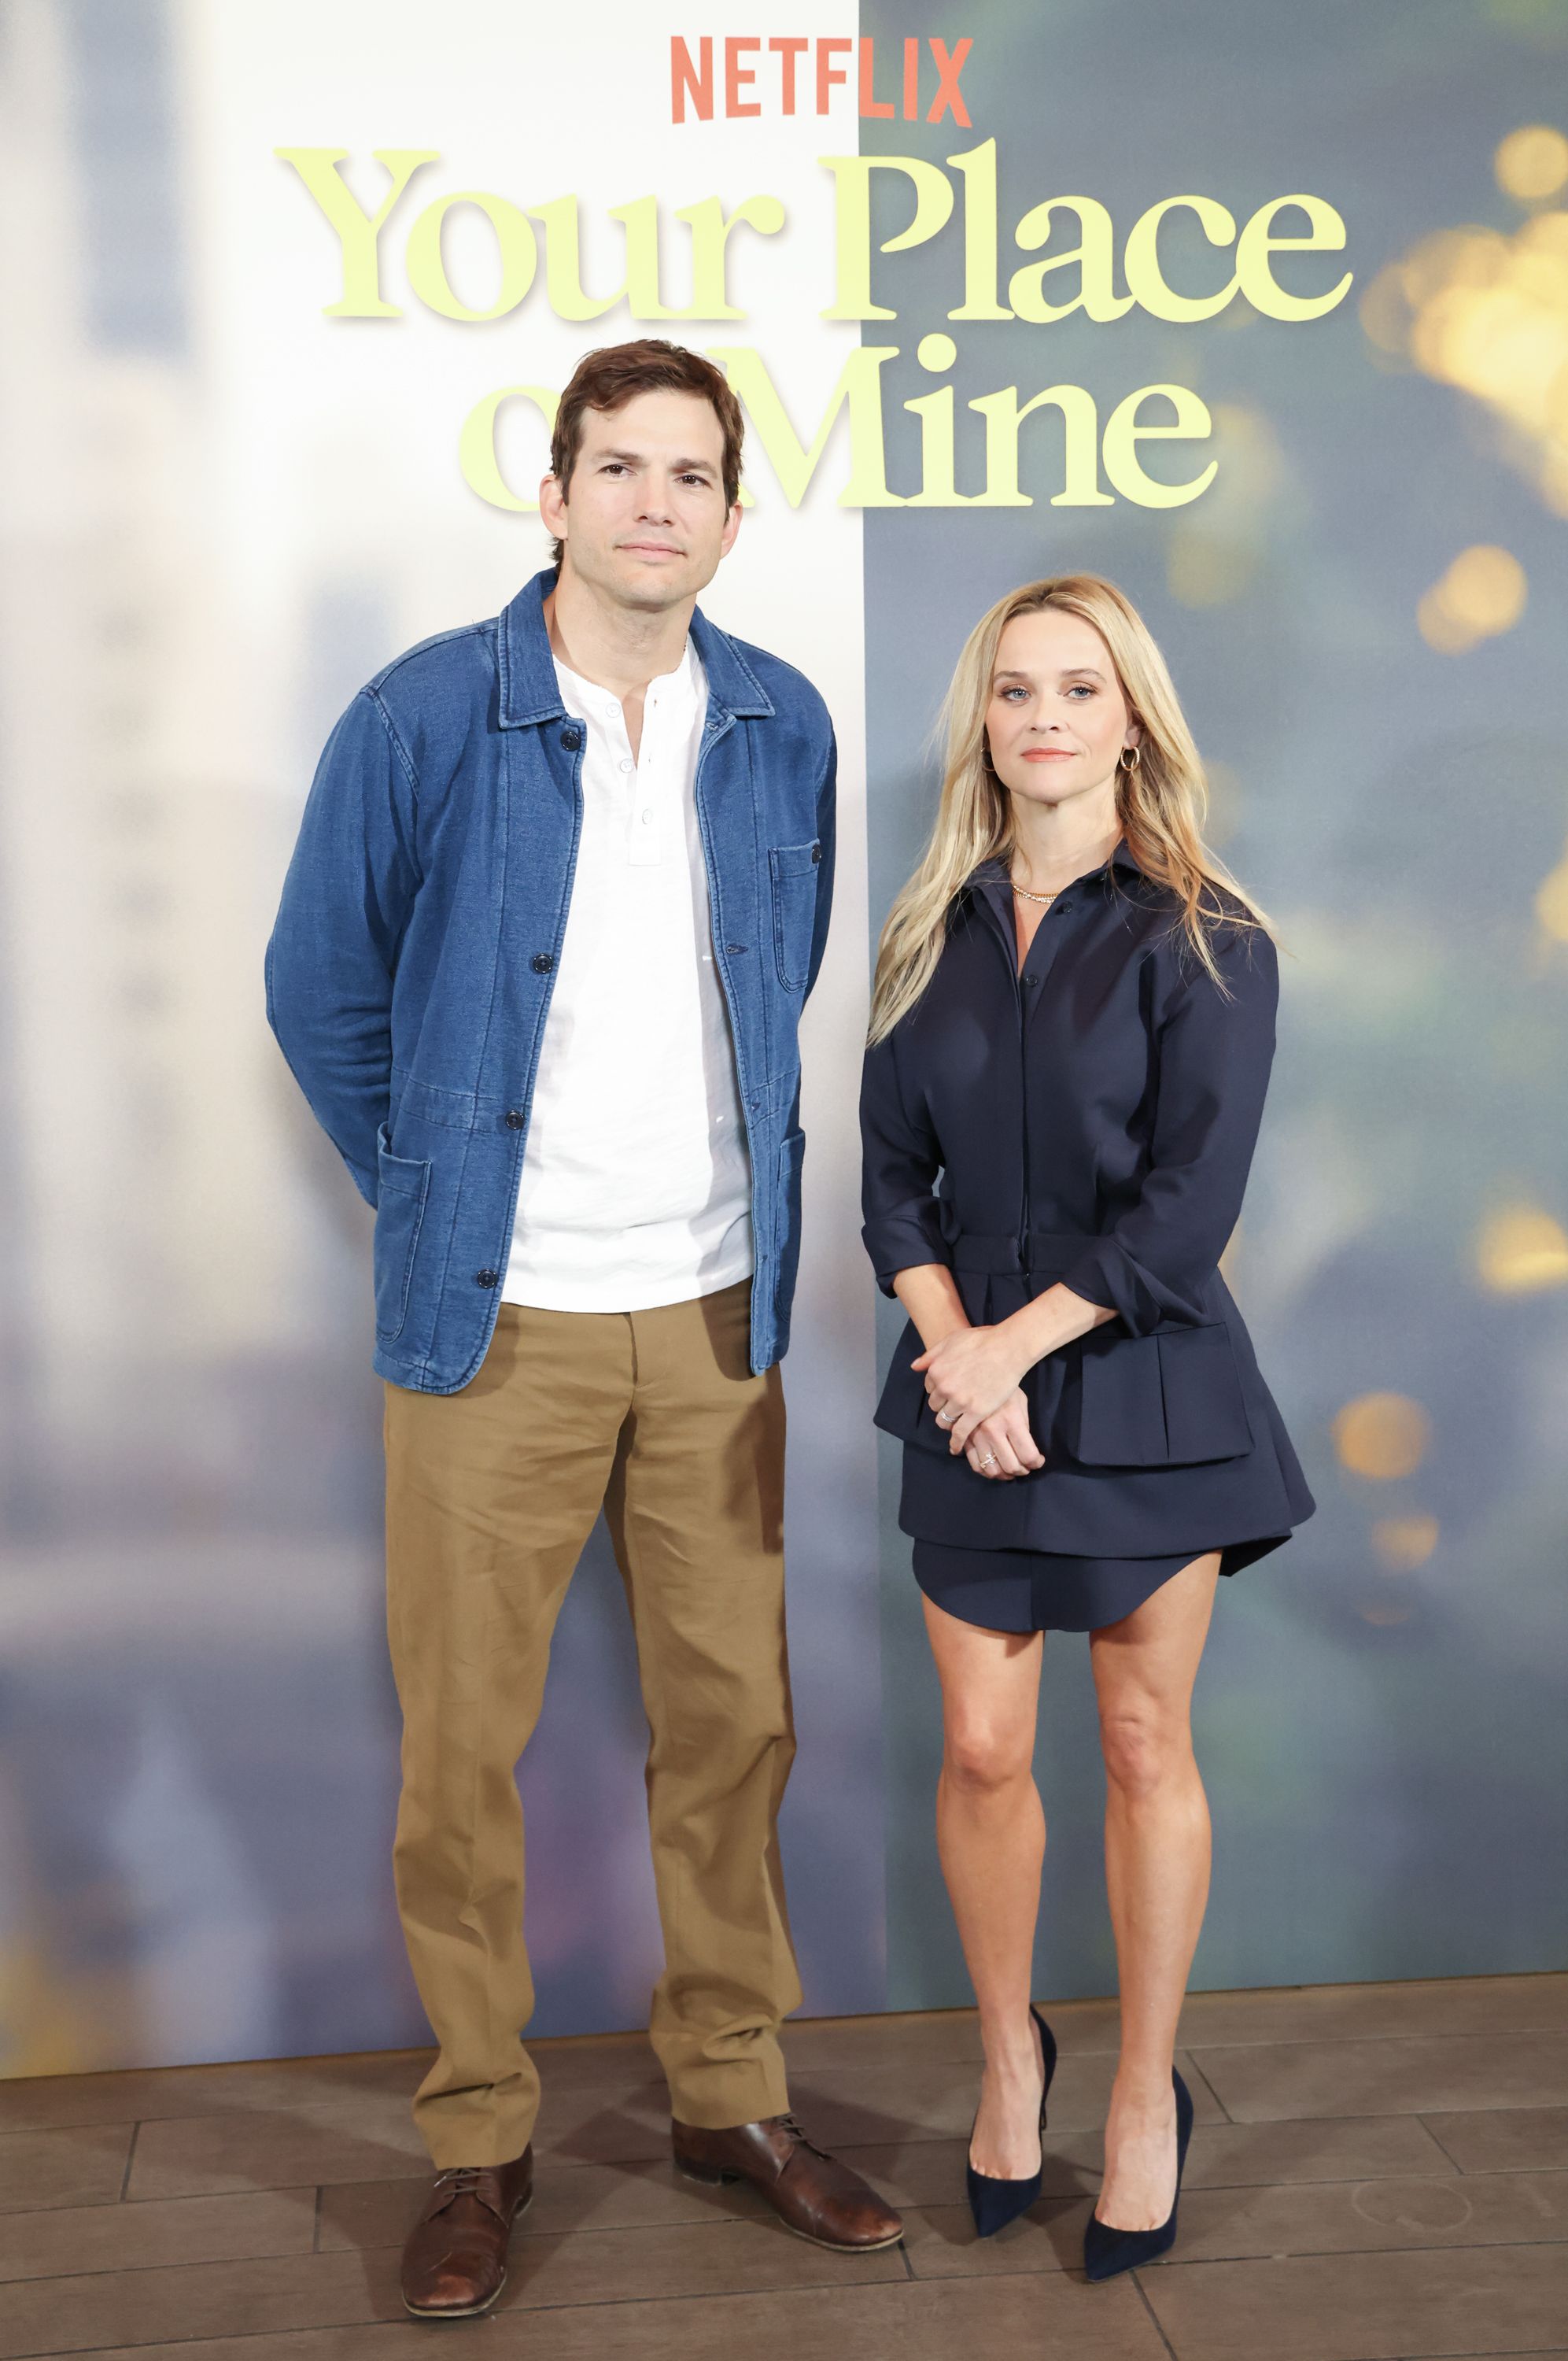 Reese Witherspoon Having Sex - How Mila Kunis Reacted to Ashton Kutcher and Reese Witherspoon's Awkward  Red Carpet Pics